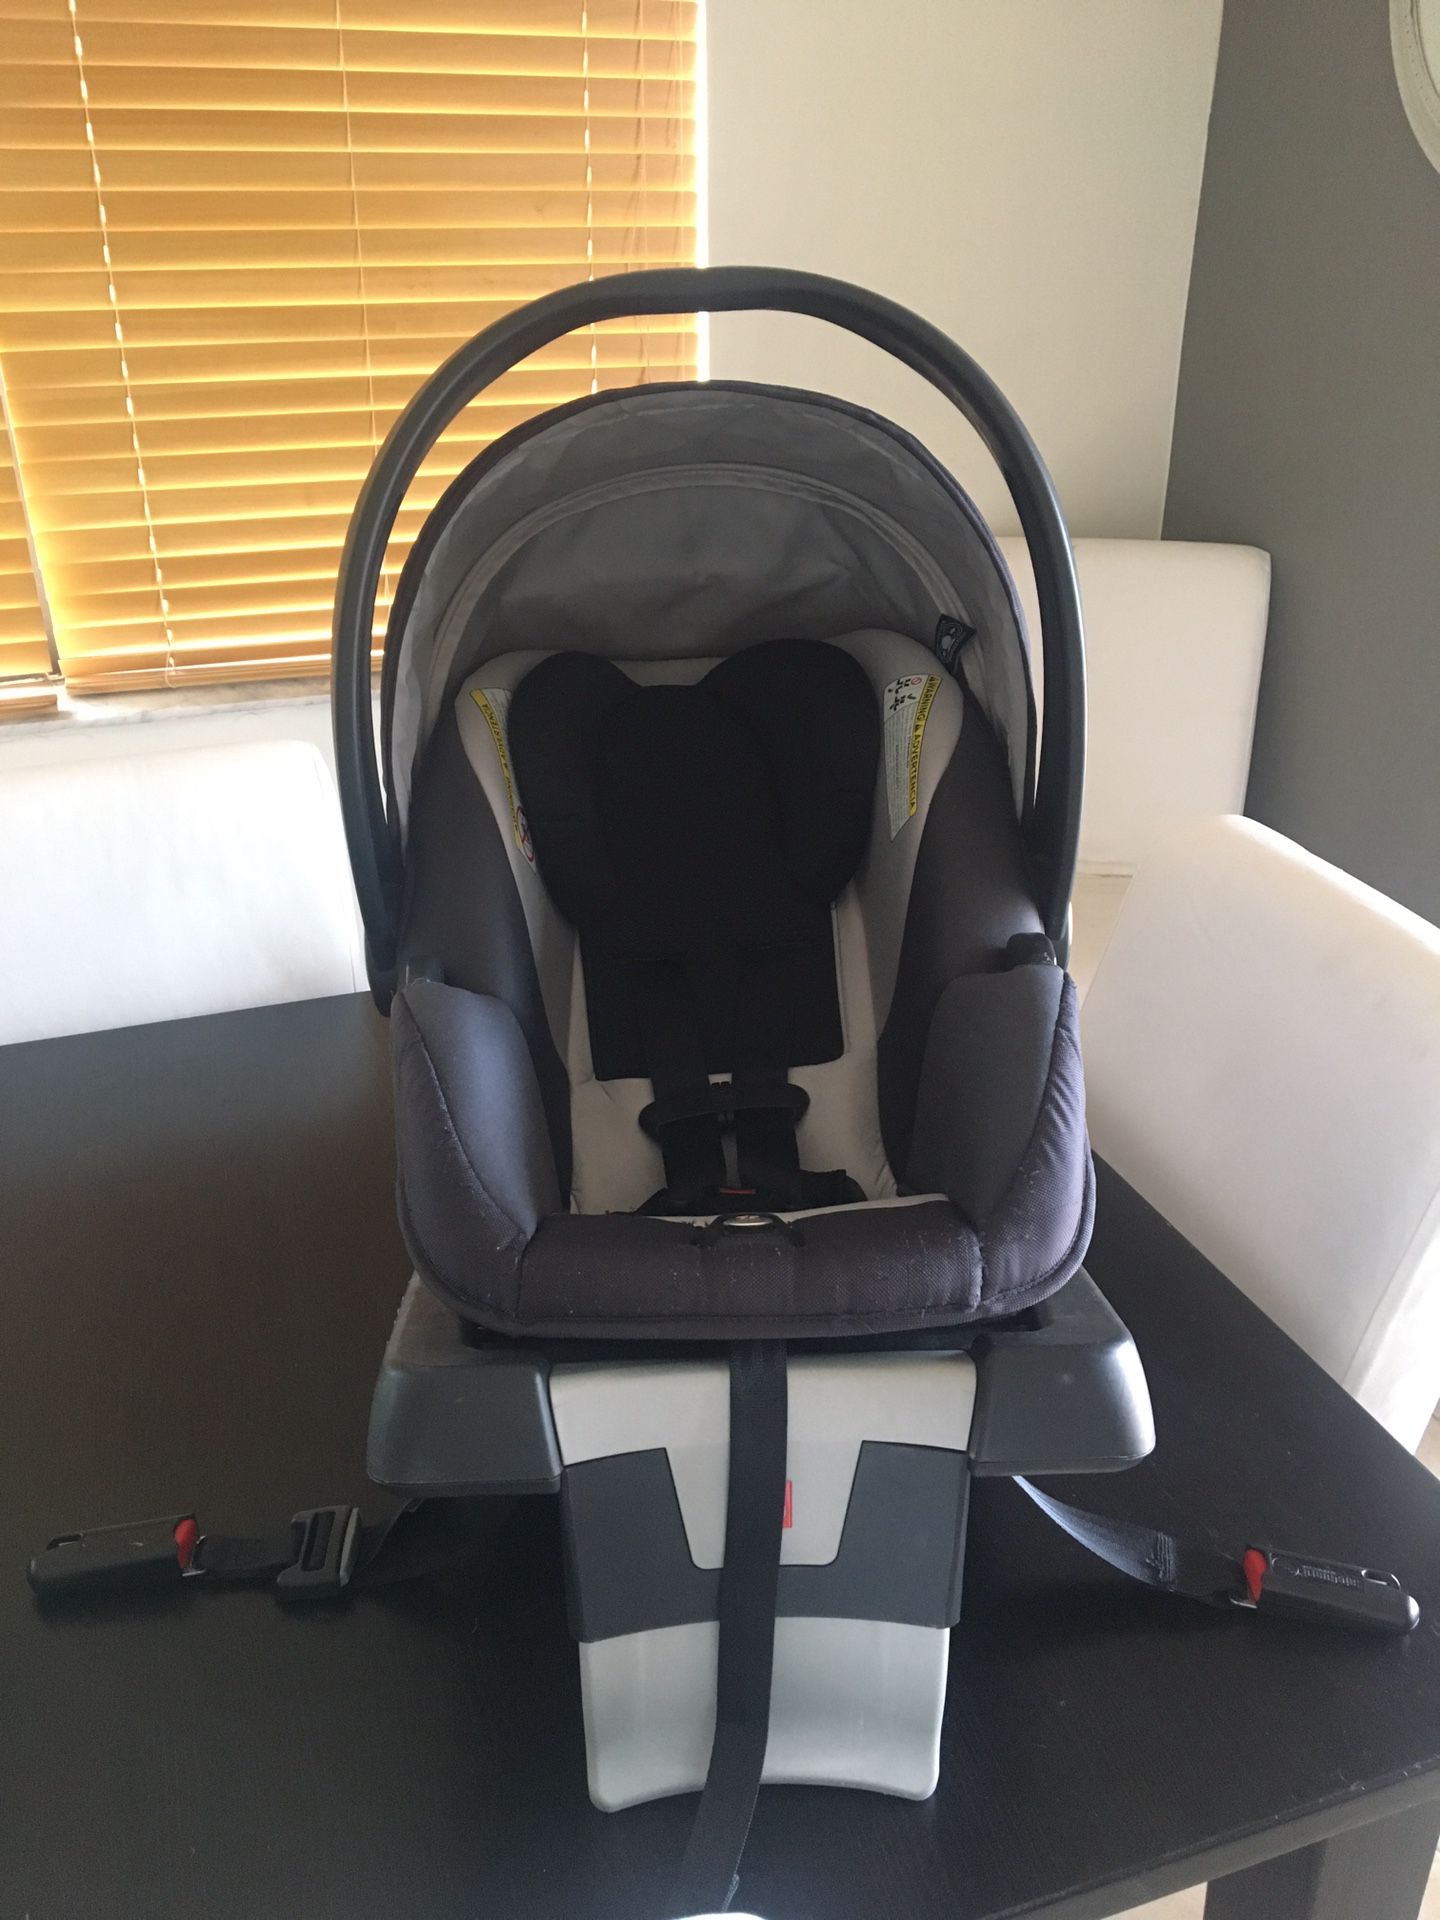 Baby Car Seat, GB infant car seat. $35 Great Deal !